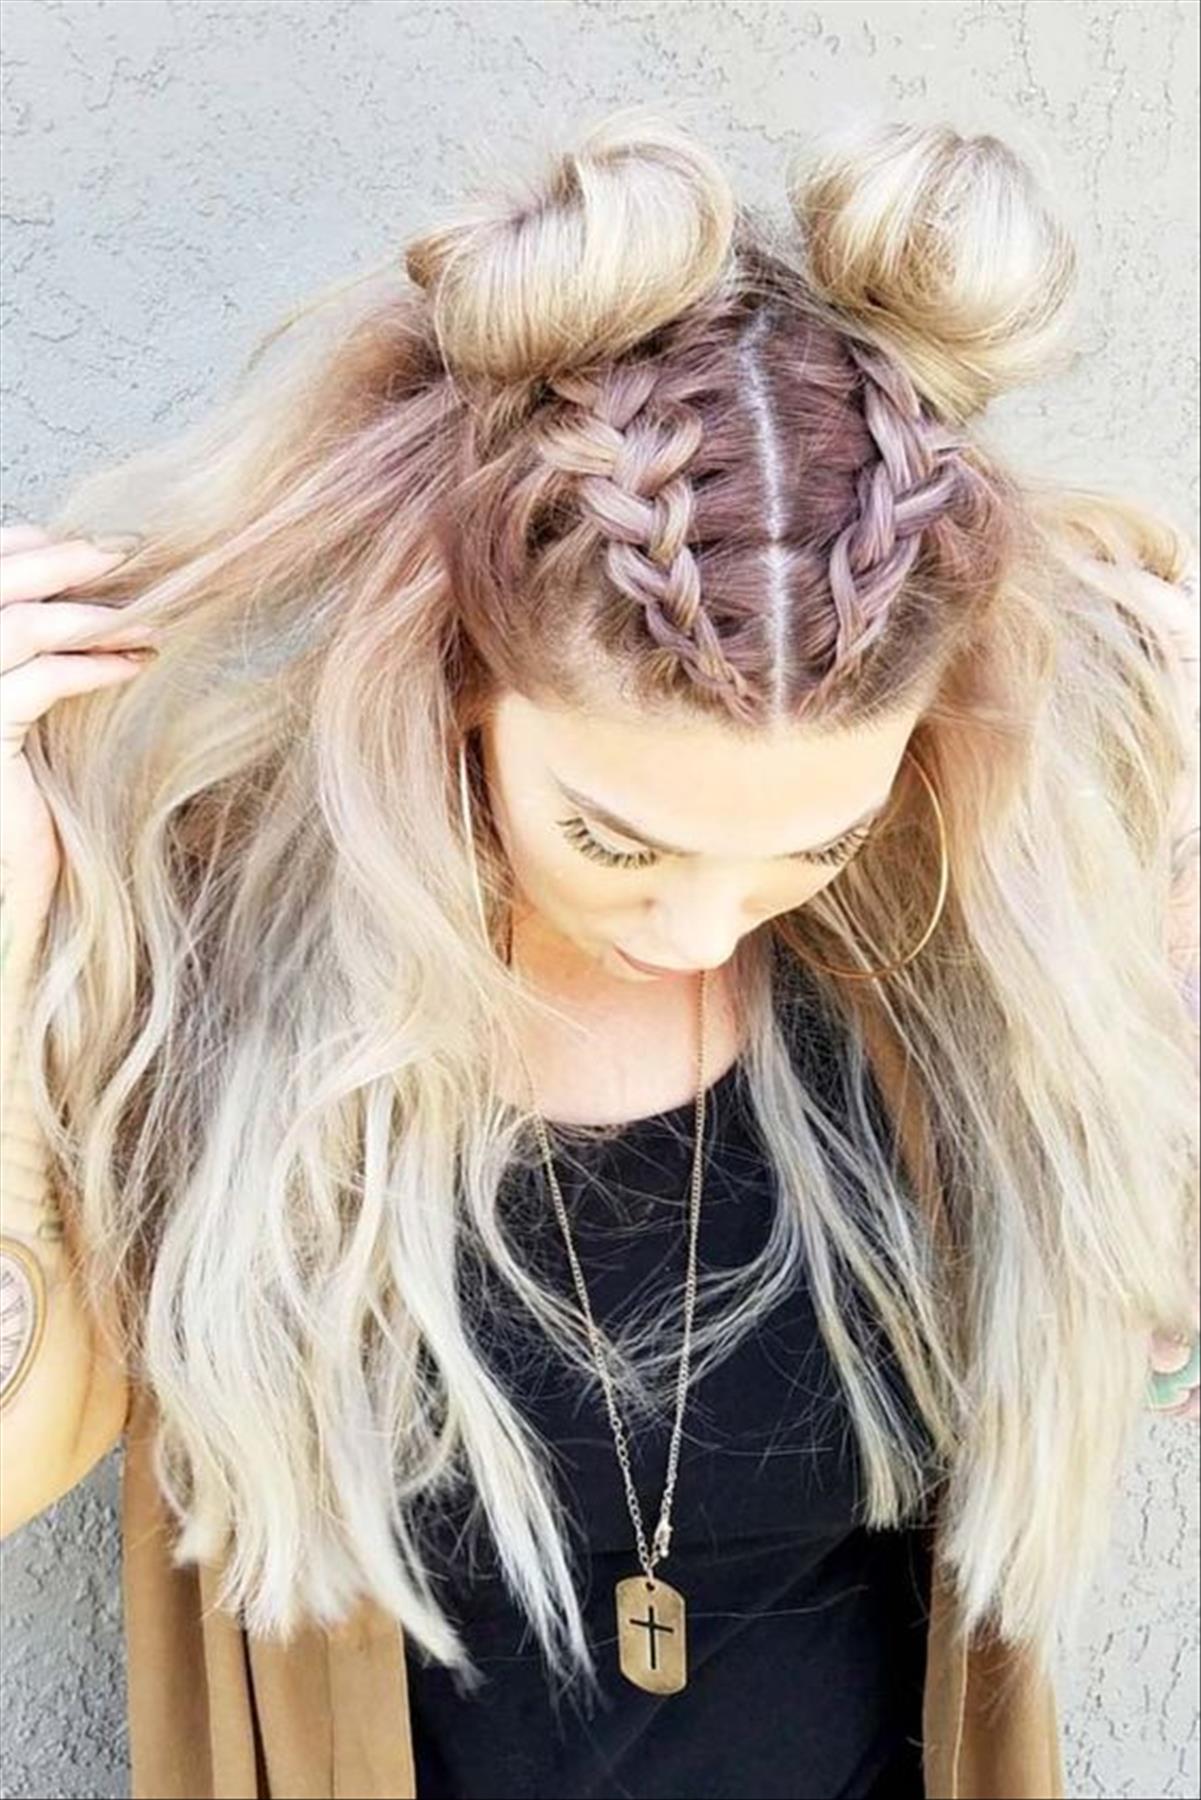 Cute graduation hairstyle designs with buns, braids, updos, ponytails